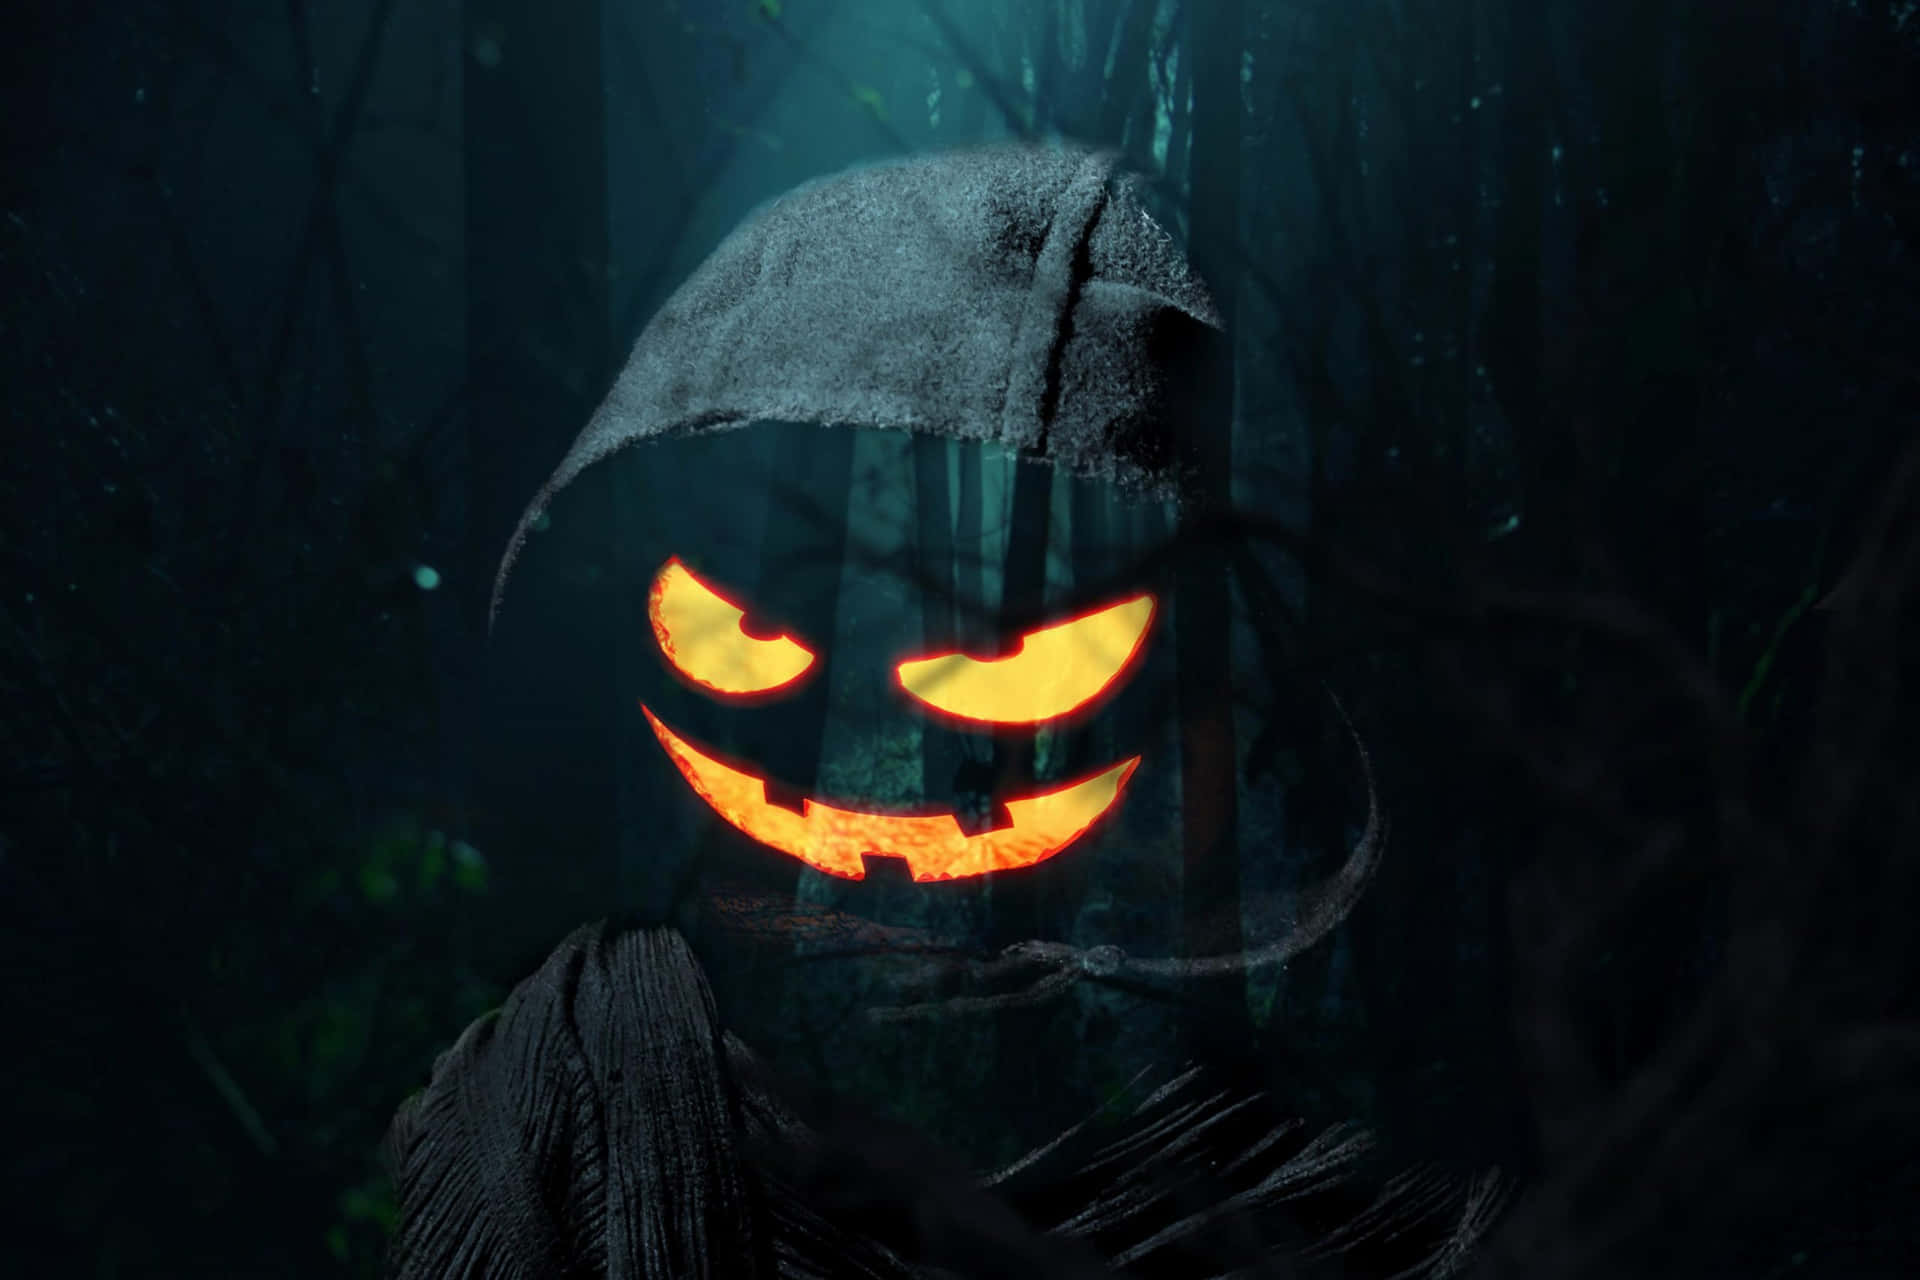 Get into a "spooky" mood this Halloween with this eerie background